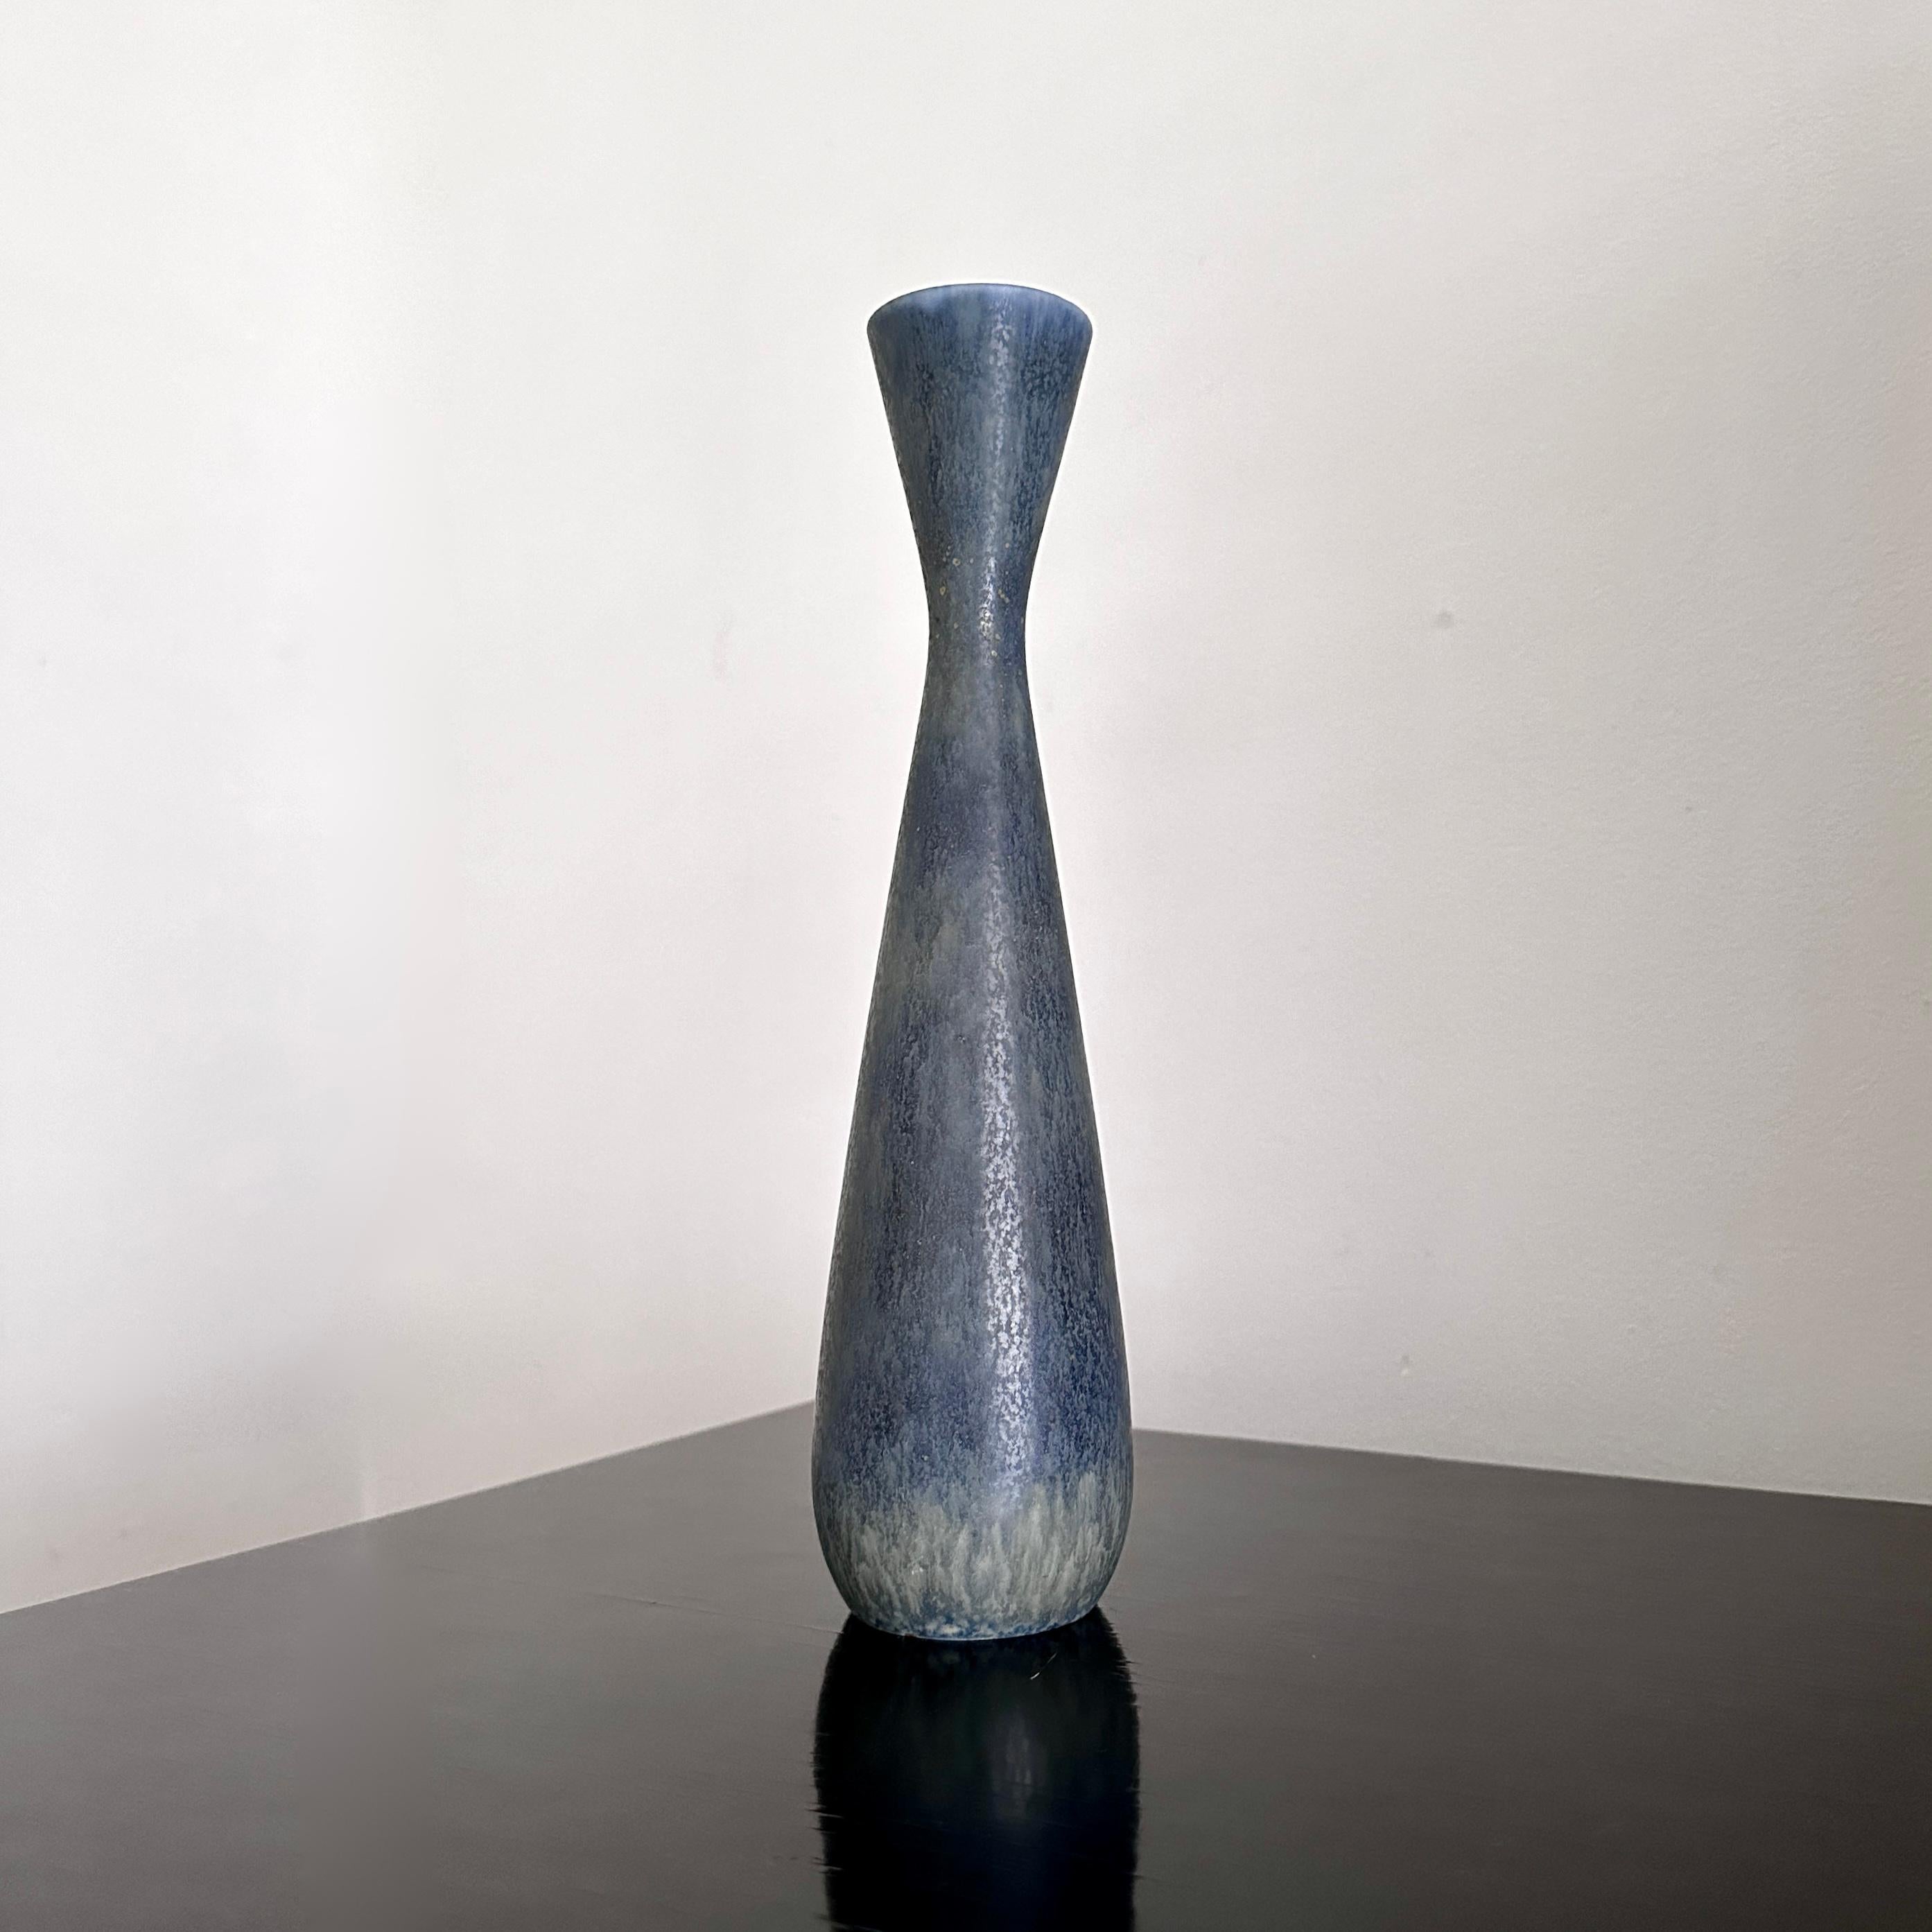 A beautiful blue / green vase designed by Carl-Harry Stålhane (1920‑1990) for Röstrand Procelain Works

Stålhand started working for Rorstrand at the age of 18. Initially, he decorated ceramic wares as assistant to the leading artist Gunnar Nylund.